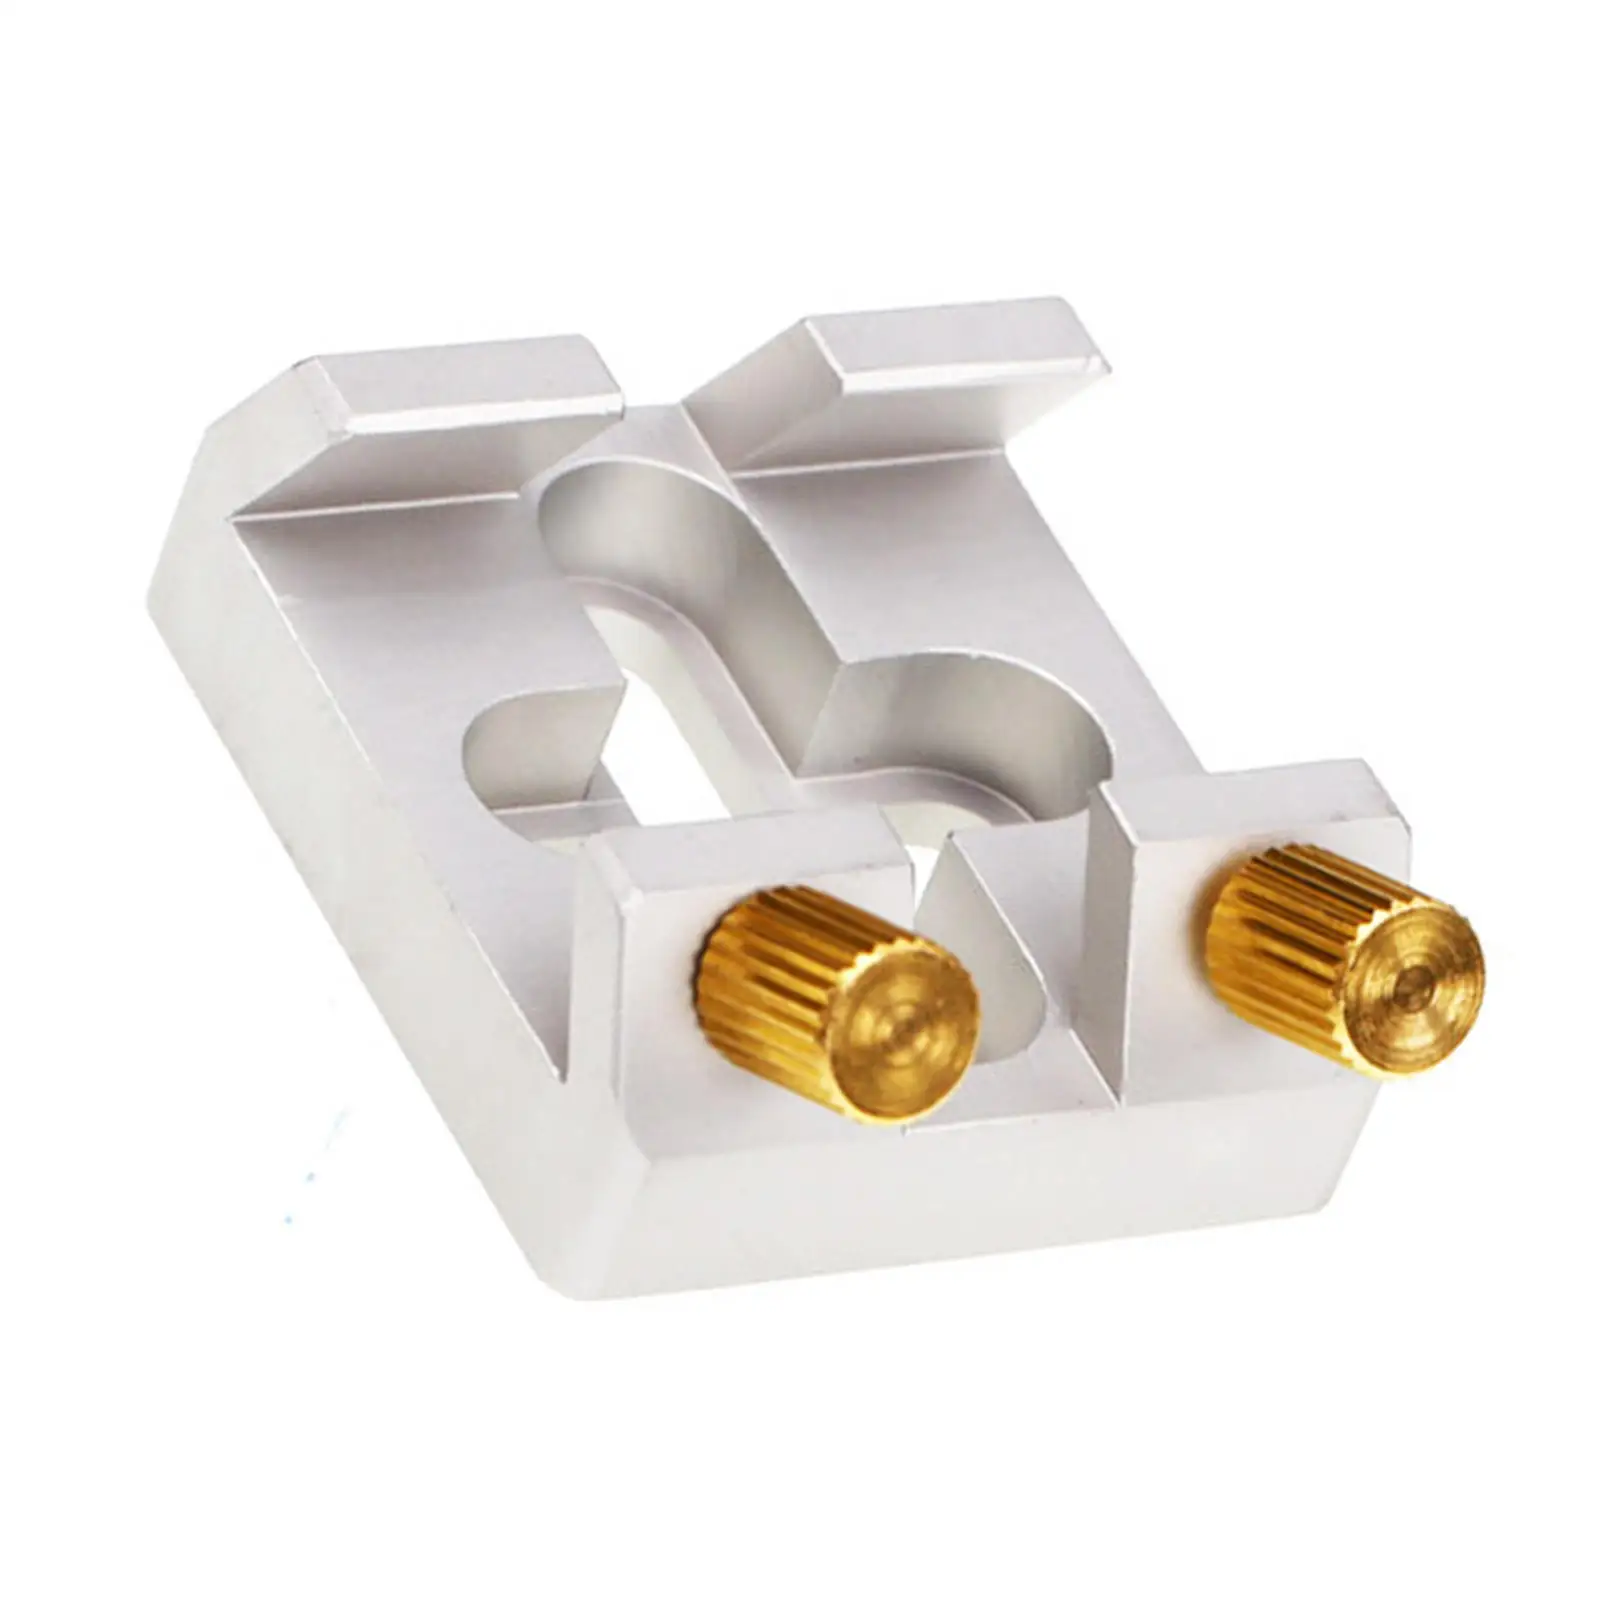 Universal Dovetail Base for Finder Scope Dovetail Slot Plate Aluminium Alloy Finderscope Mount Bracket Accessories